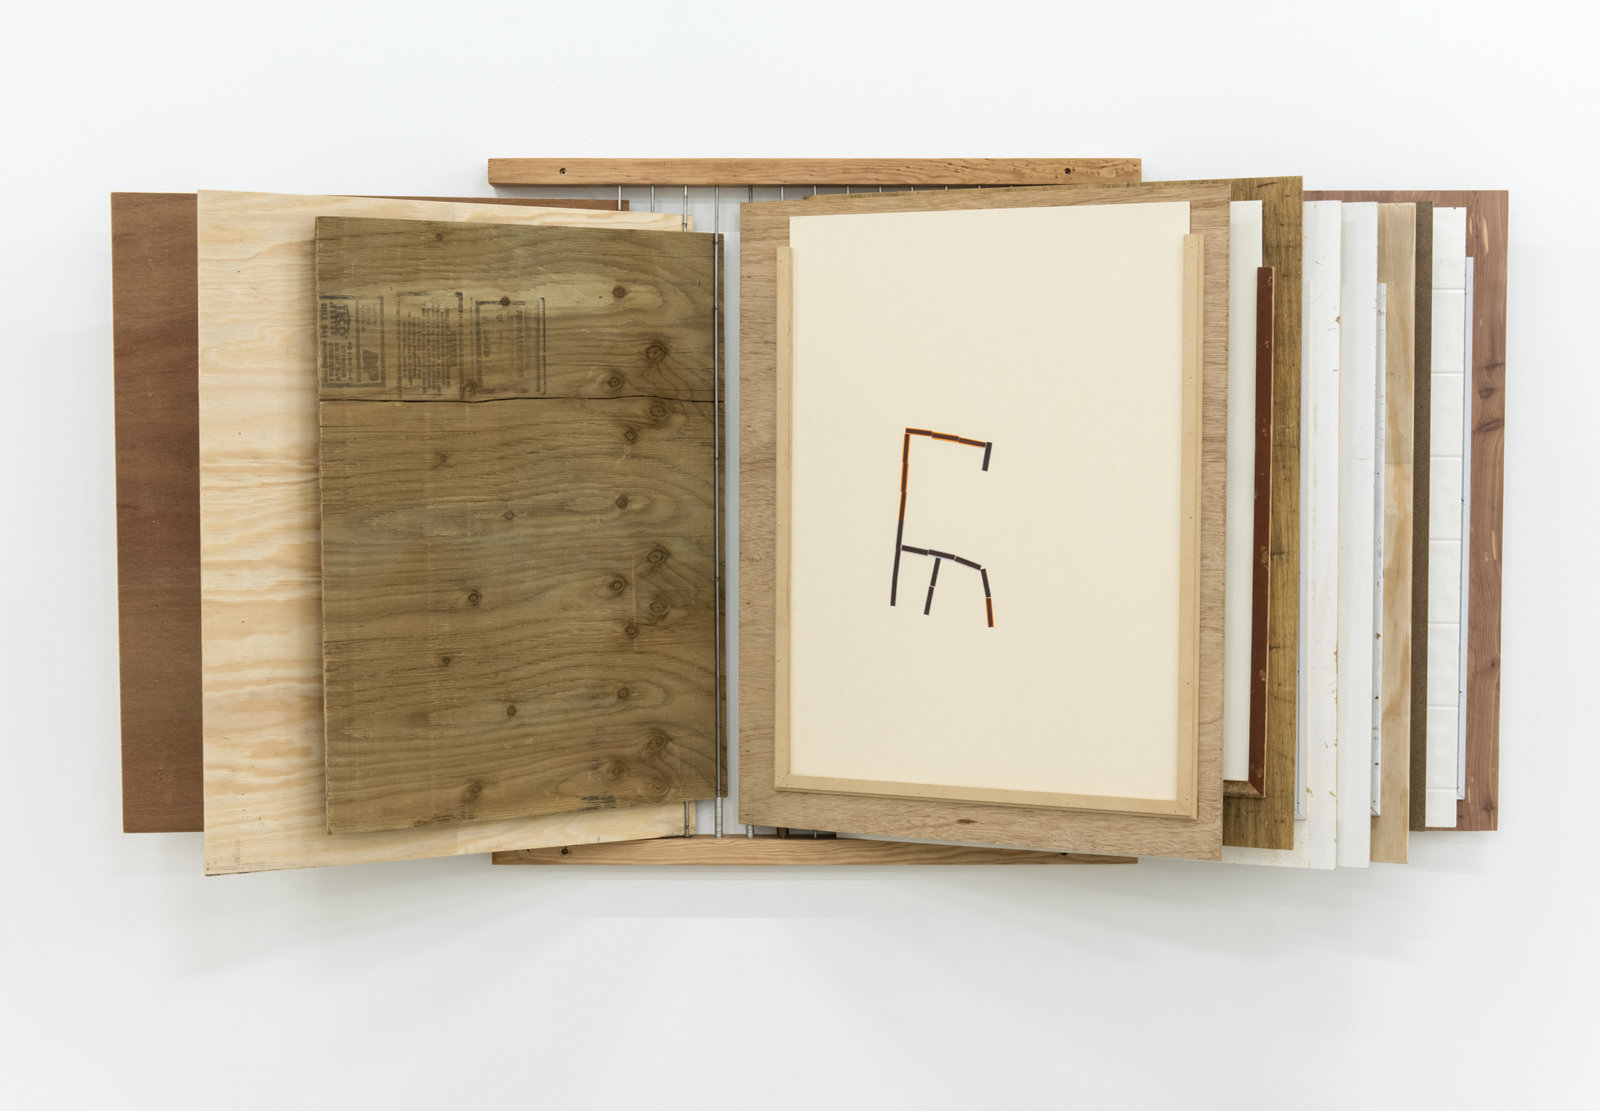 Ashes Withyman, Unclassified symbol, 2013, match strike pads on paper, 34 x 27 in. (85 x 69 cm)